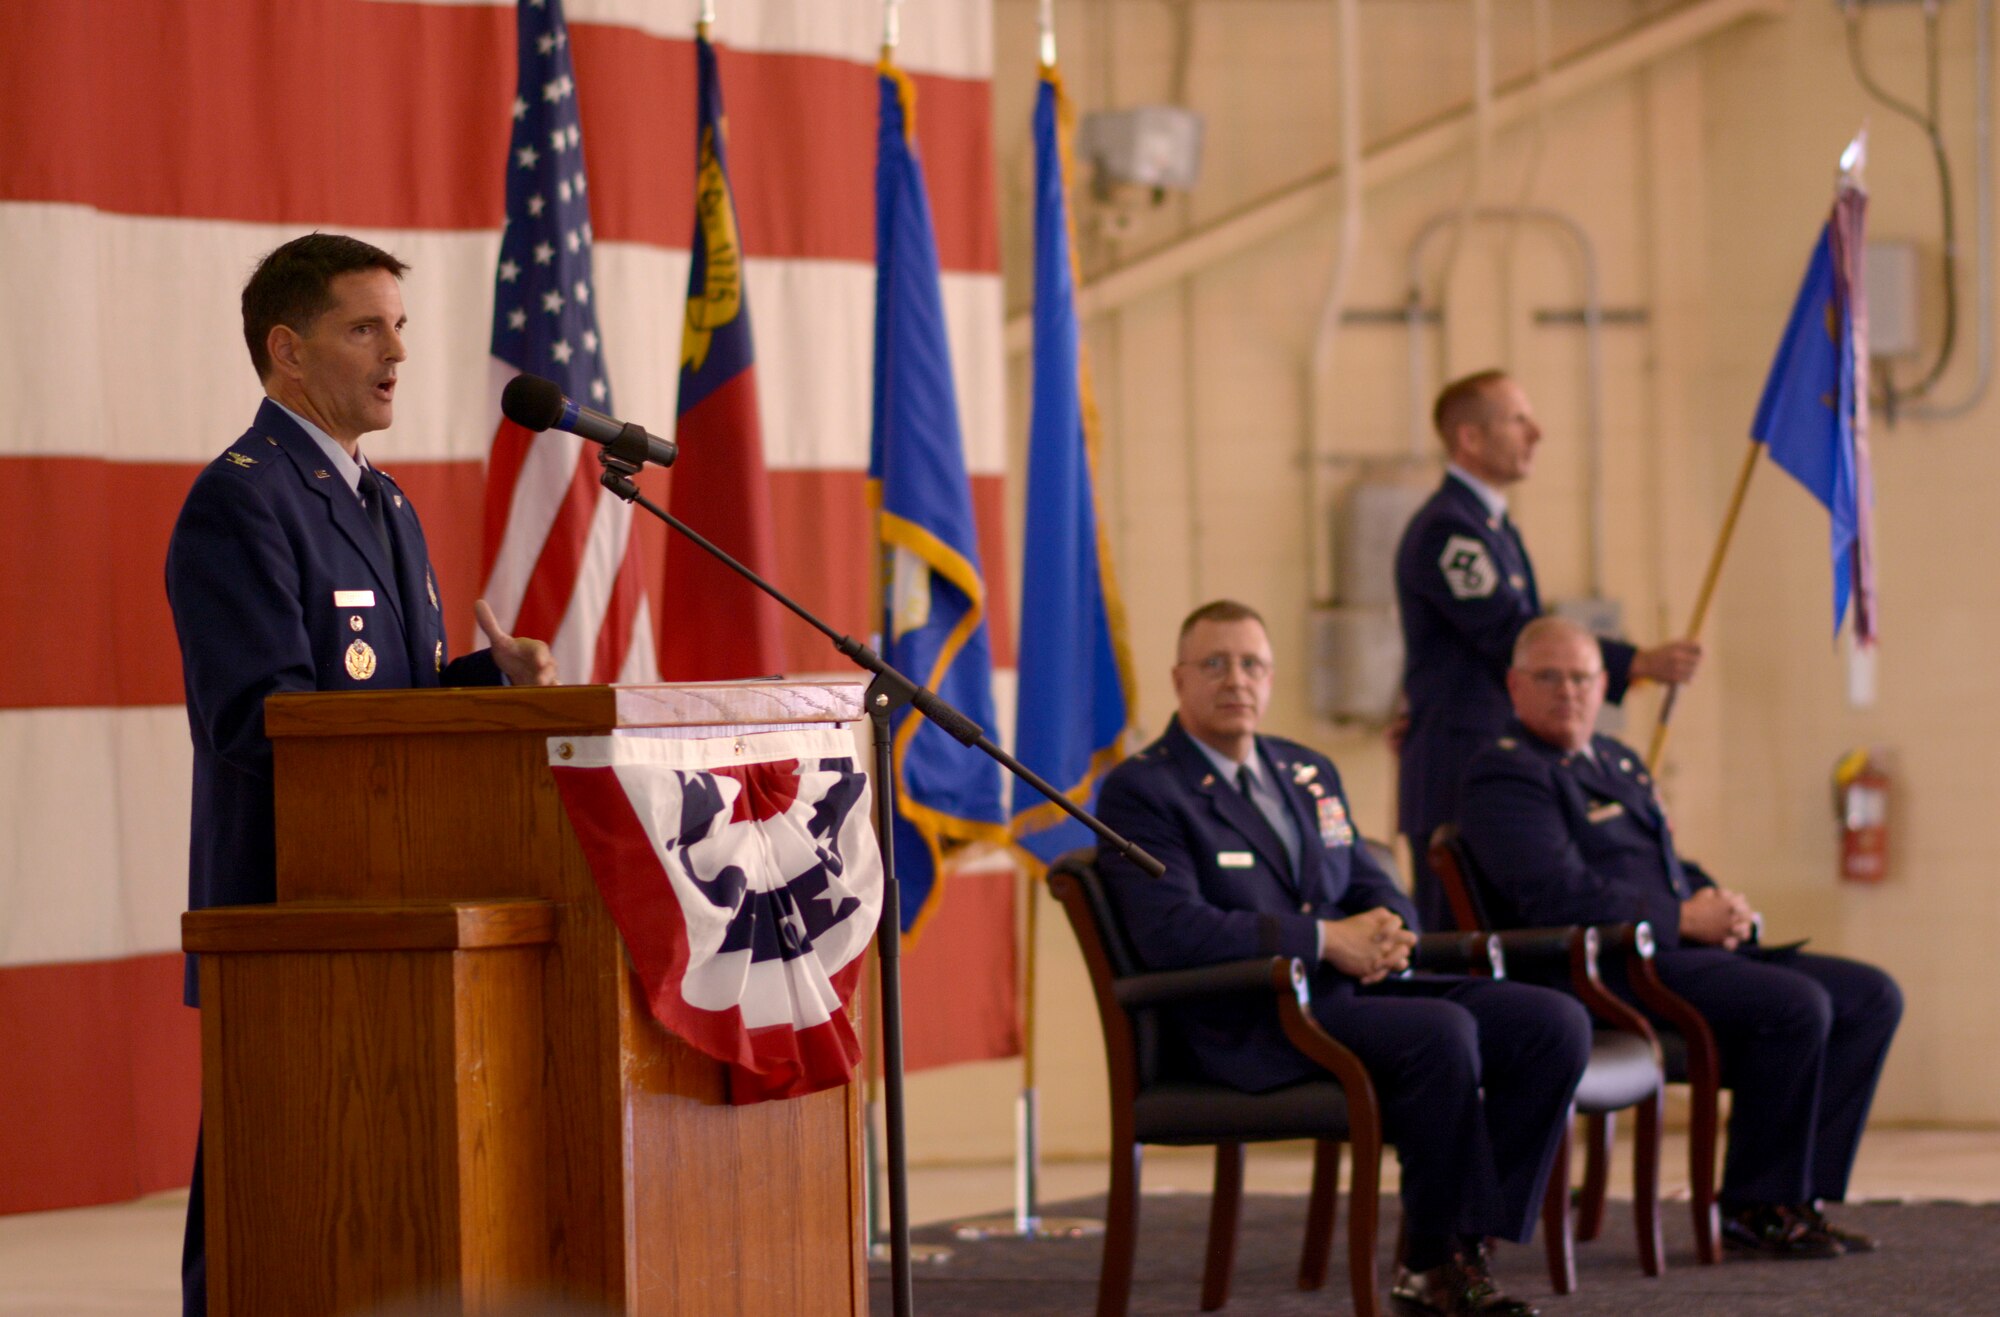 U.S. Air Force Col. Michael Troy Gerock, commander of the 145th Airlift Wing, introduces himself to Airmen of the North Carolina Air National Guard (NCANG) during a change of command ceremony held at the NCANG Base, Charlotte Douglas International Airport, Oct. 1, 2016. (U.S. Air National Guard photo by Staff Sgt. Laura J. Montgomery)